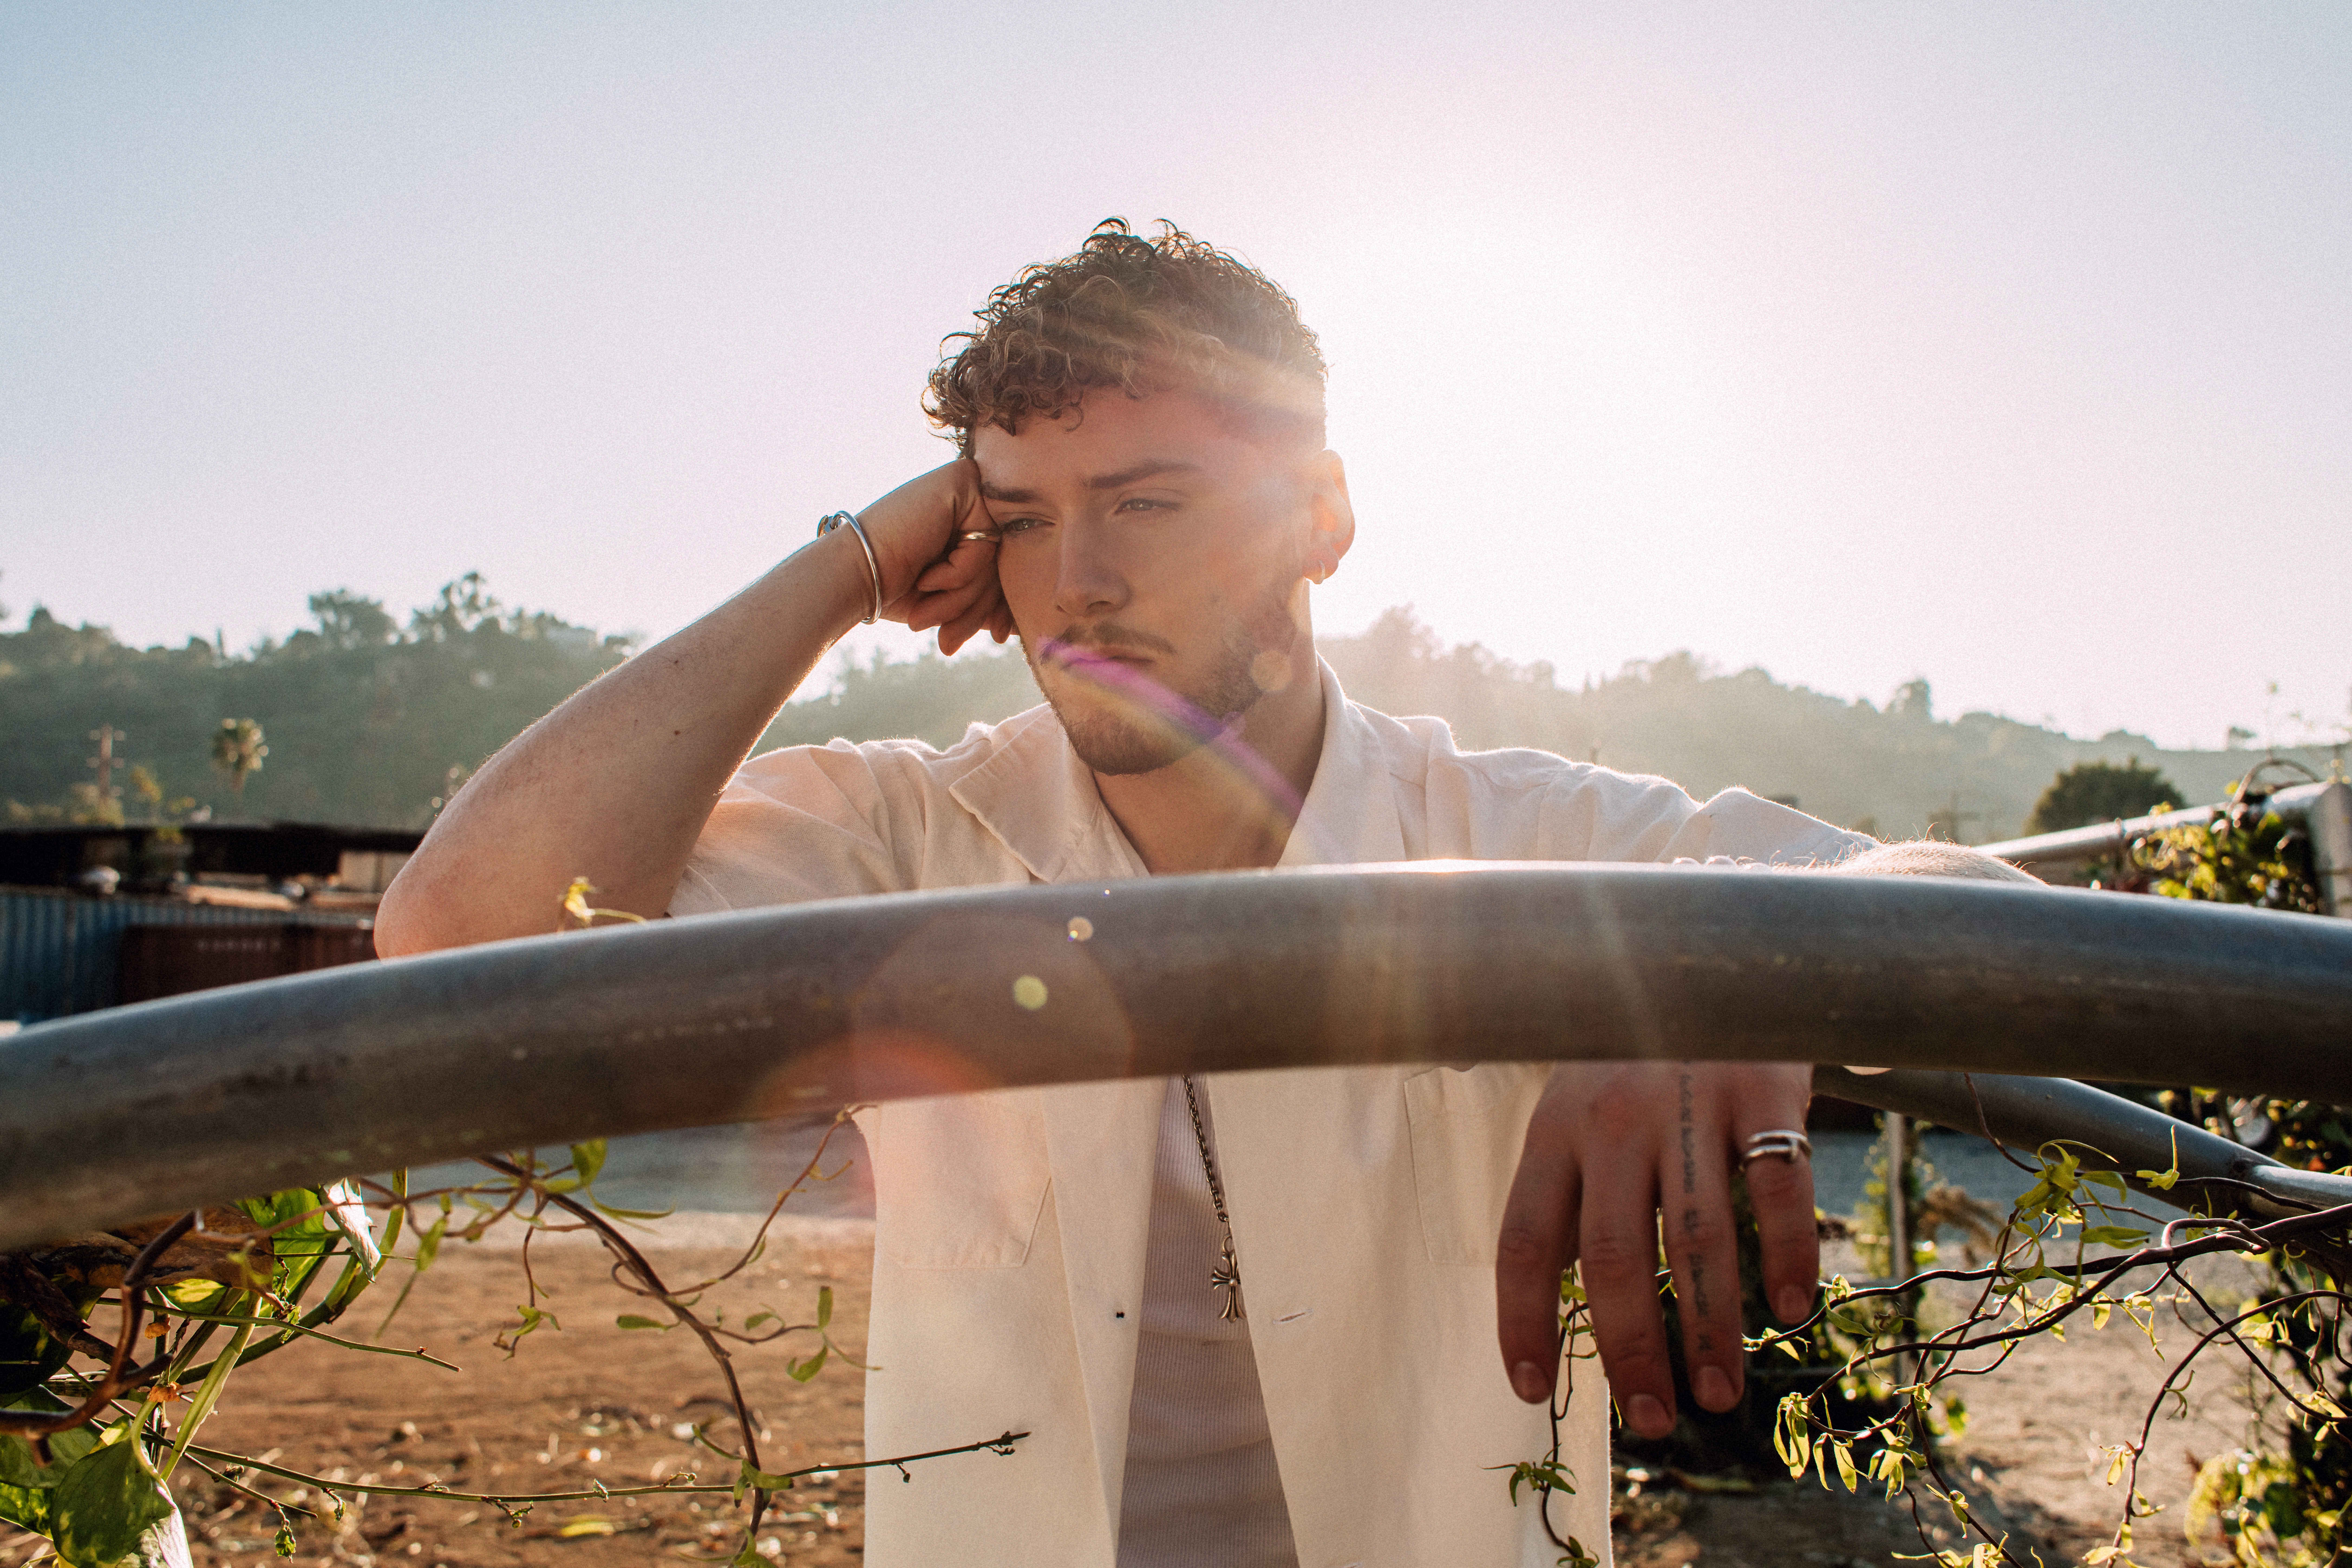 Bazzi Returns With Nostalgic New Single "Young & Alive"